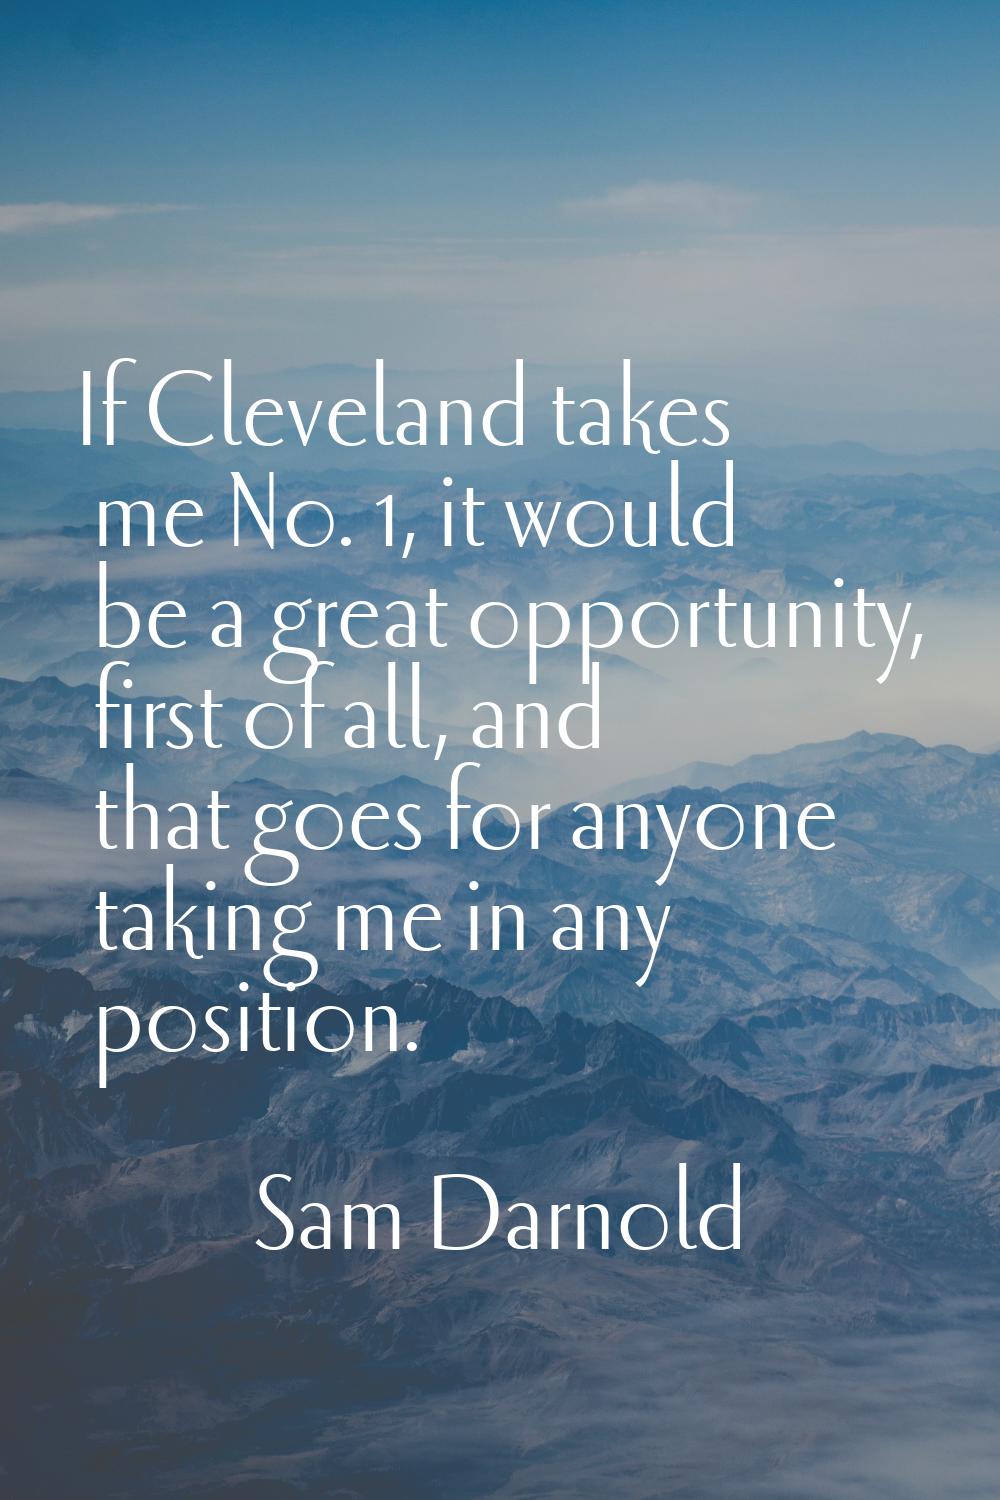 If Cleveland takes me No. 1, it would be a great opportunity, first of all, and that goes for anyon